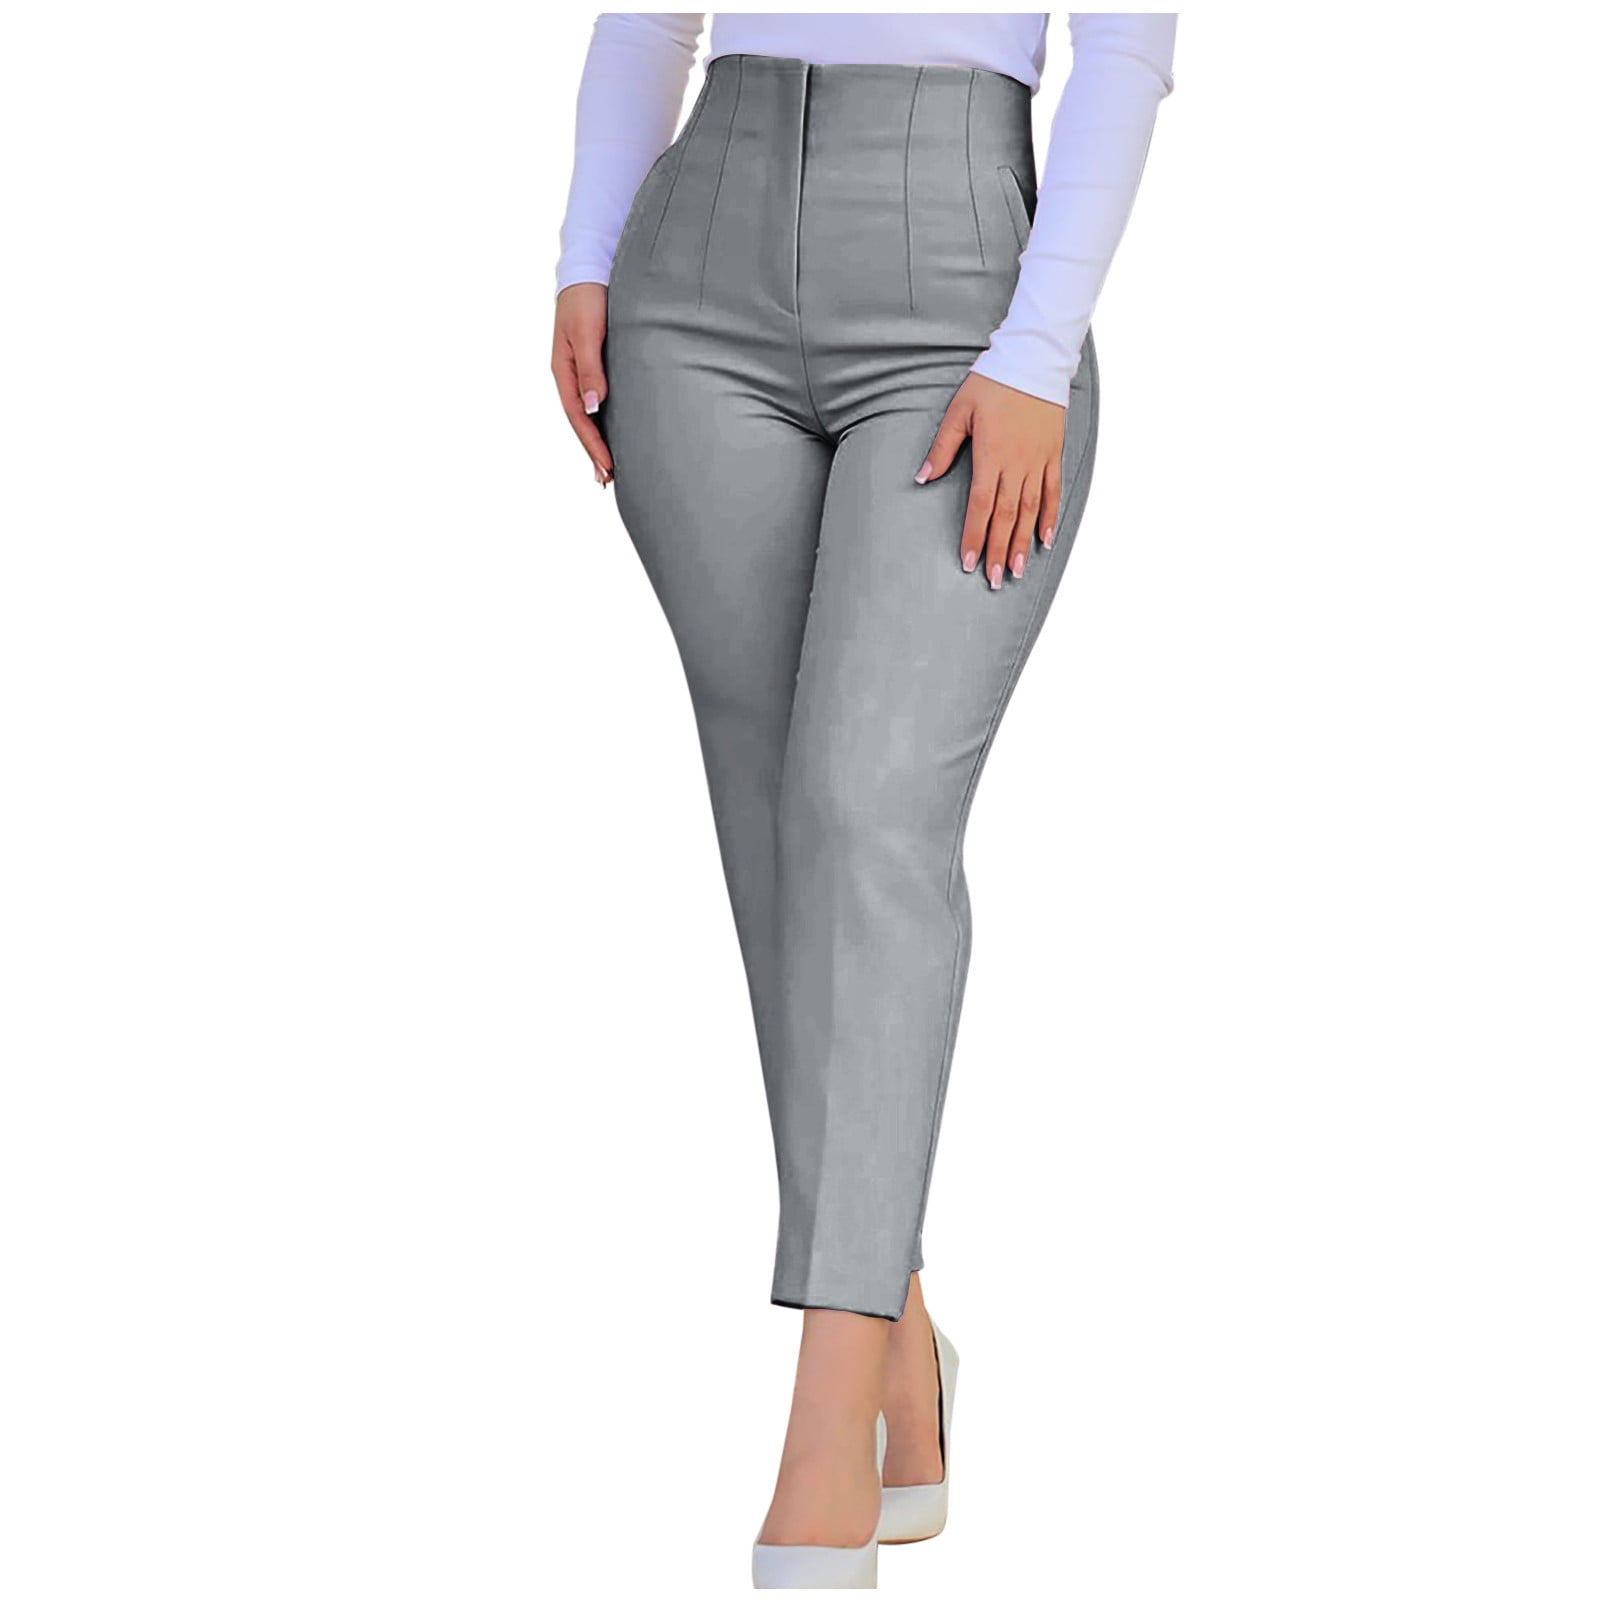 RYRJJ Plus Size Wide Leg Pants for Women Work Business Casual High Waisted  Dress Pants Comfy Flowy Trousers Office(White,5XL)